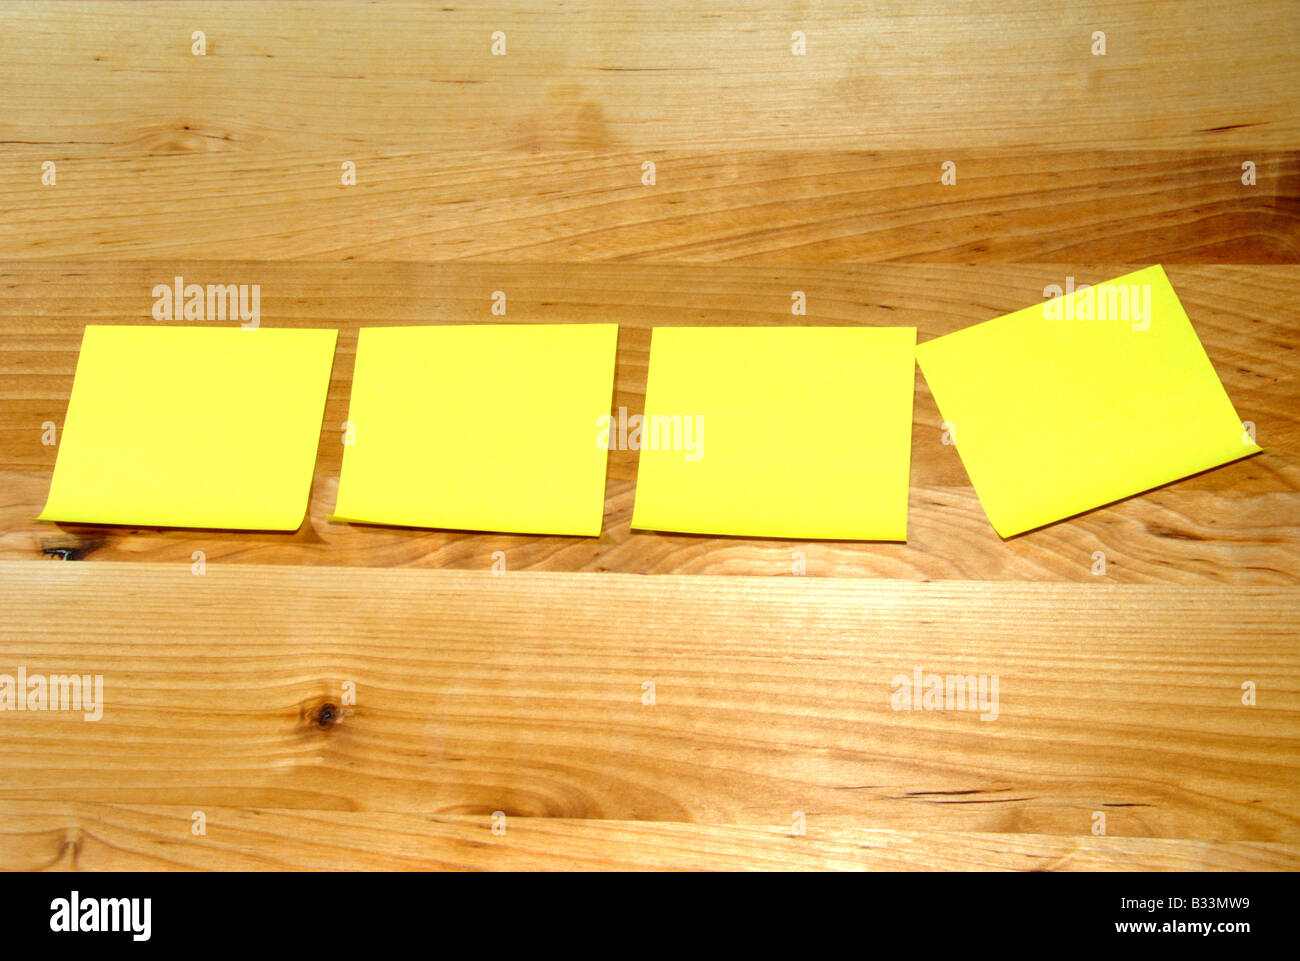 Yellow stickies on wooden board Stock Photo